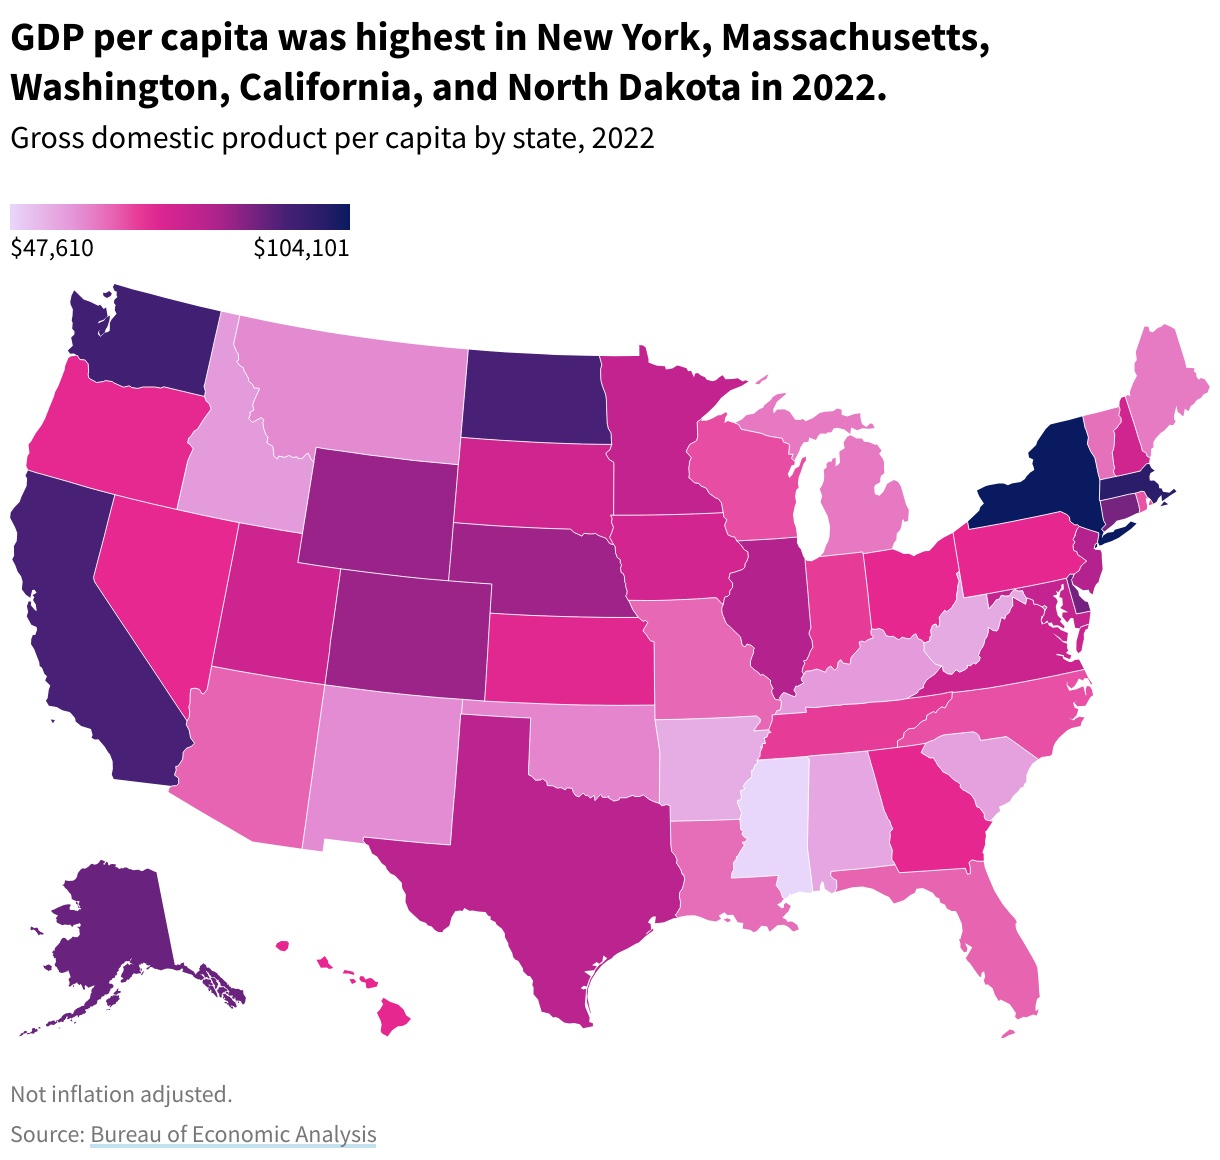 Map of the US showing GDP per person by state. New York has the highest GDP per person at $104,100, followed by Massachusetts and Washington. The scale ranges from $47.6K to $104.1K. GDP per person is lowest in Mississippi, Arkansas, and West Virginia.